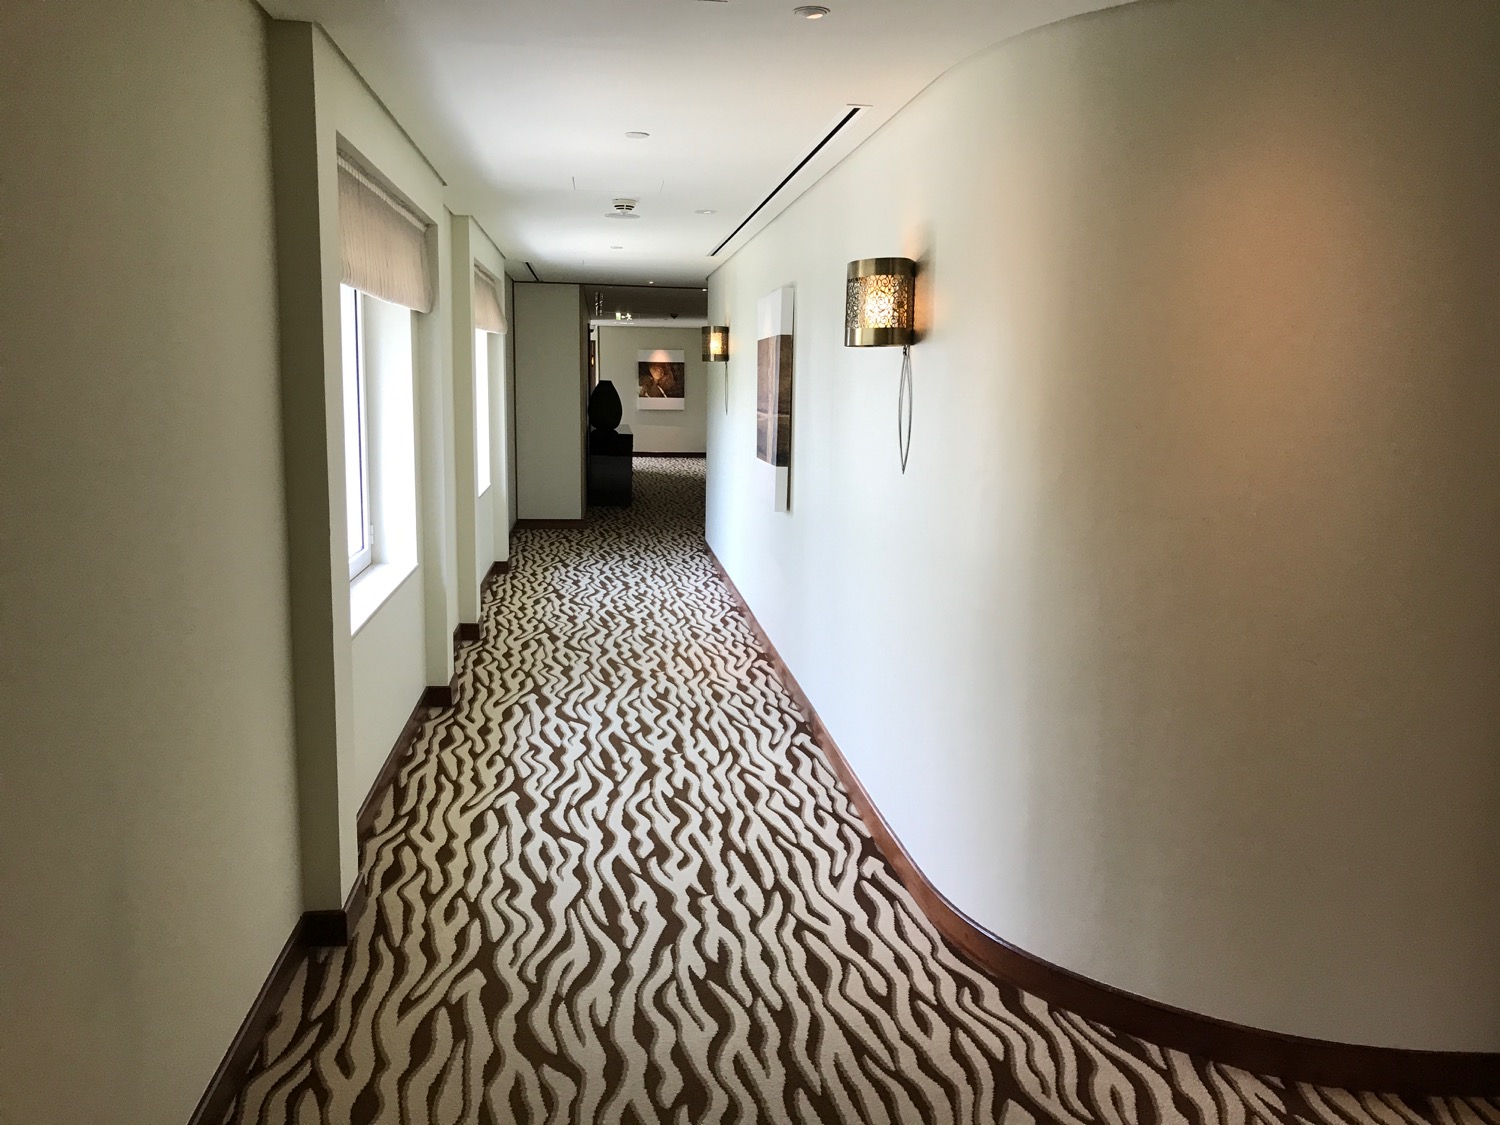 a hallway with zebra carpet and lights